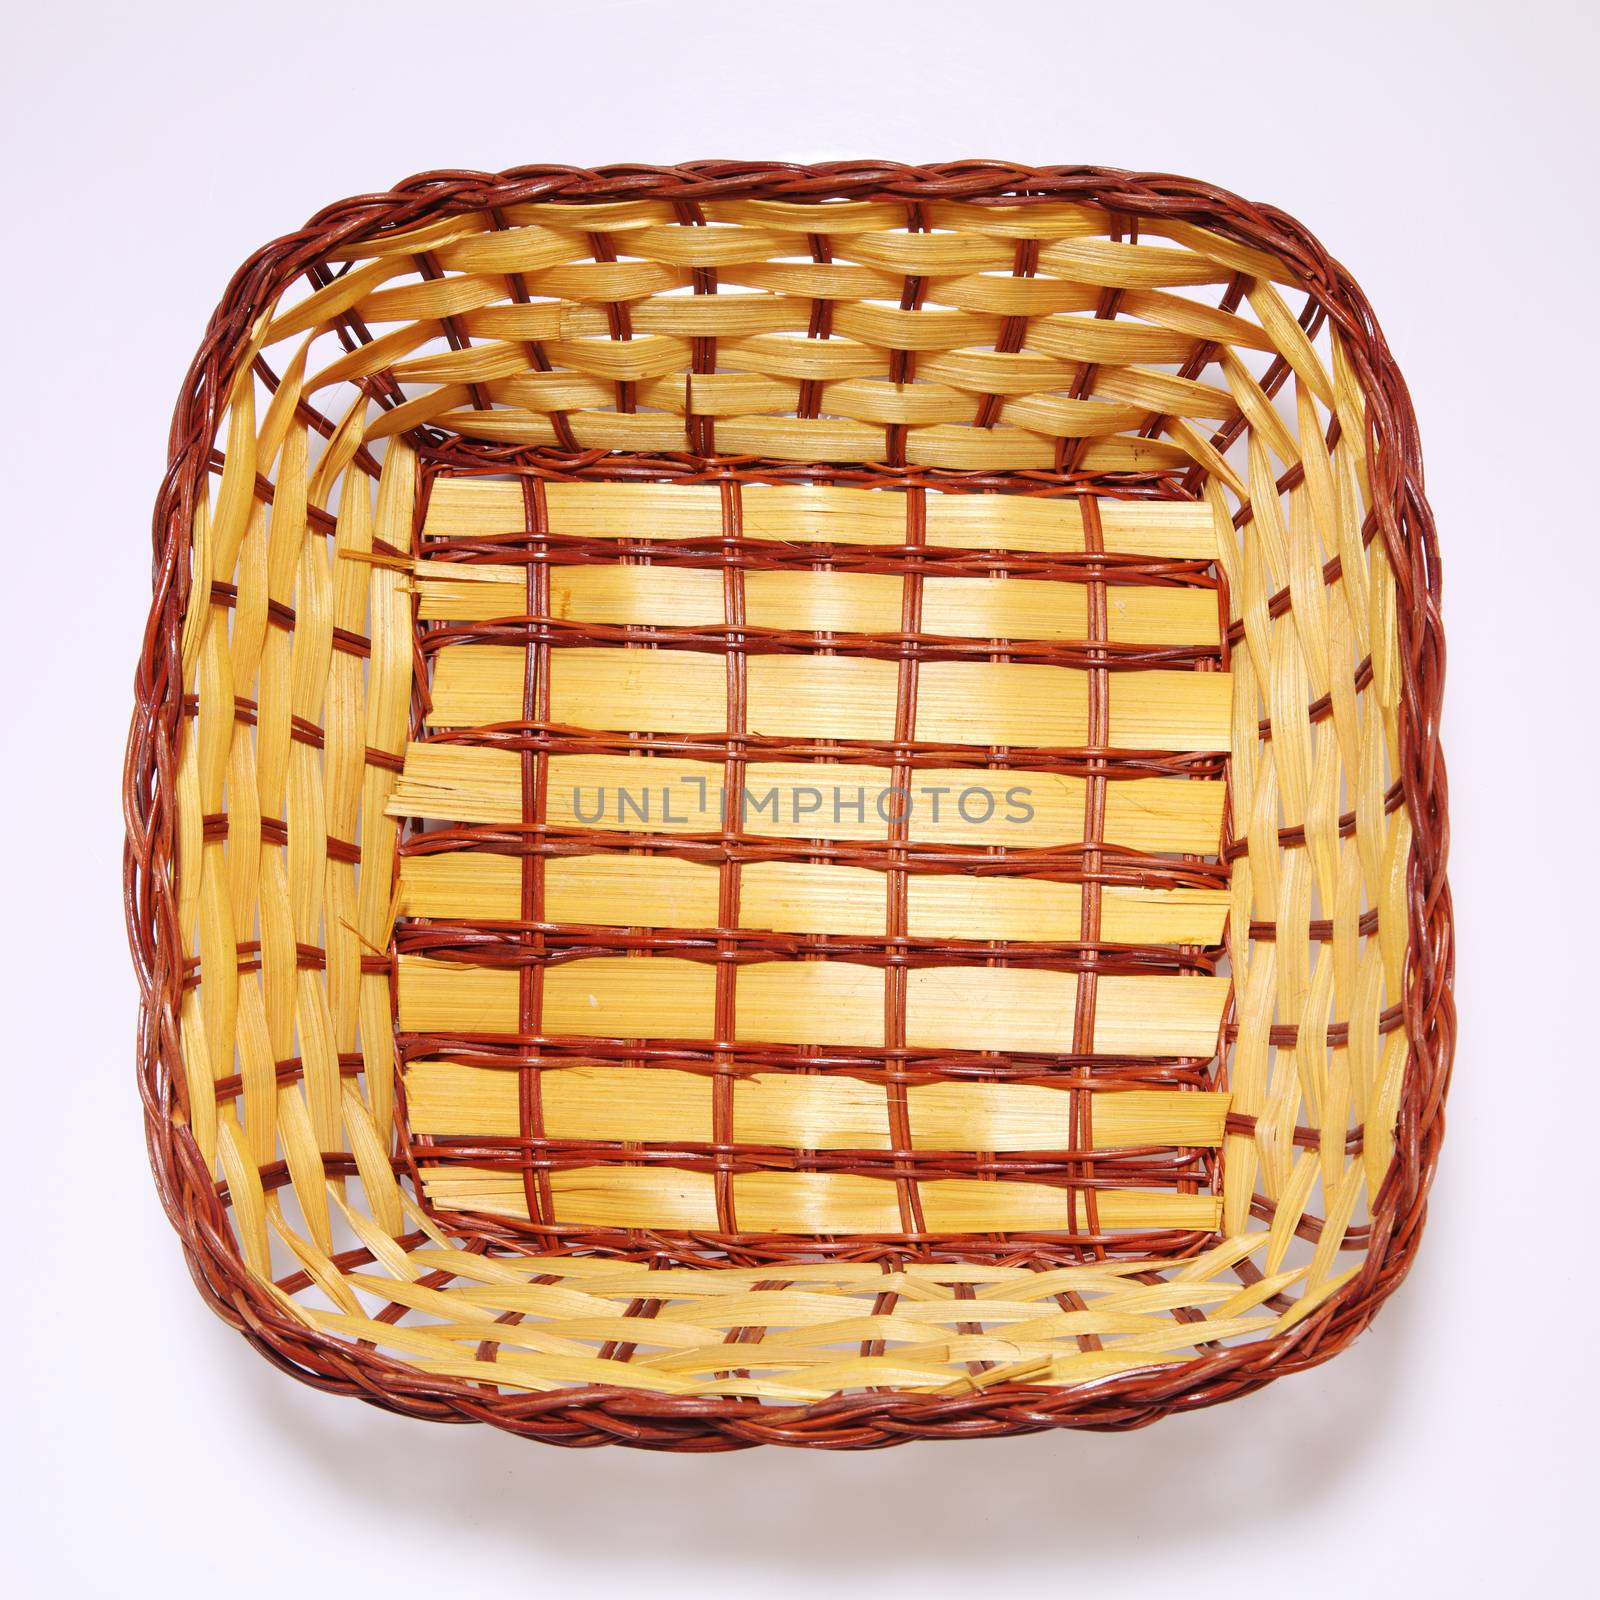 top view of the bamboo basket